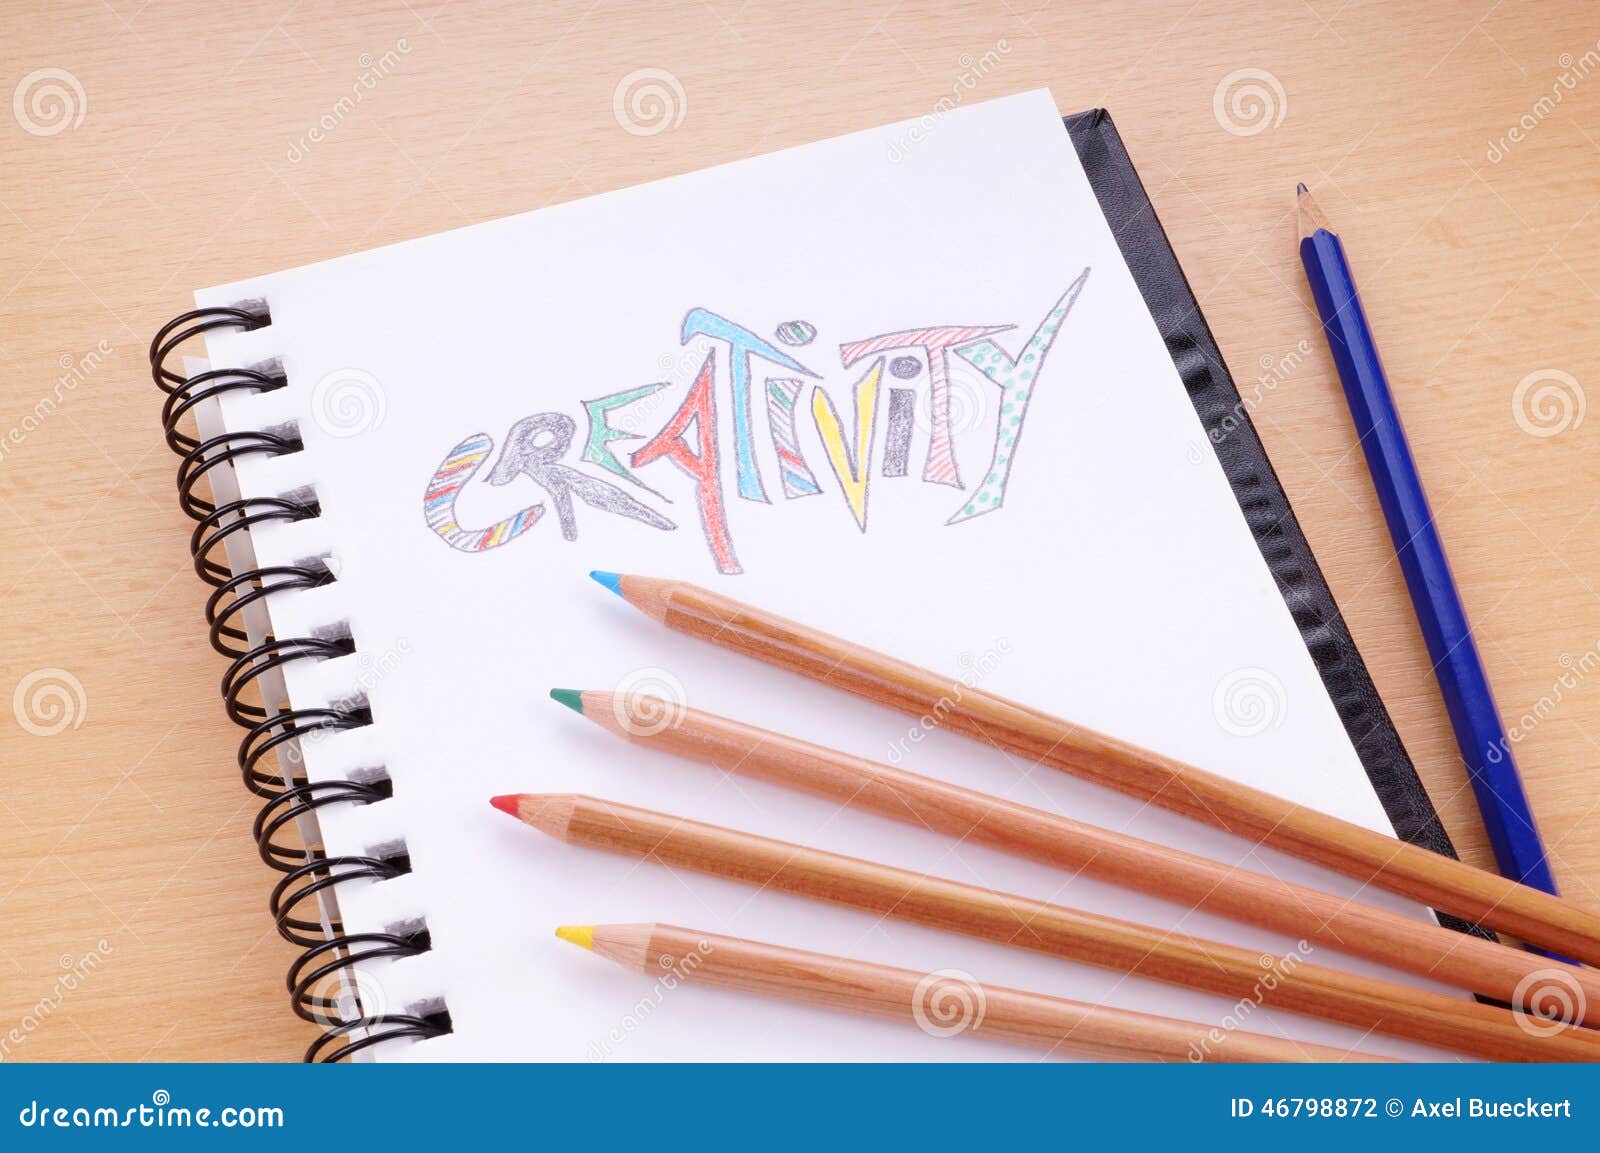 https://thumbs.dreamstime.com/z/creativity-concept-writing-pad-word-drawn-colored-pencils-46798872.jpg